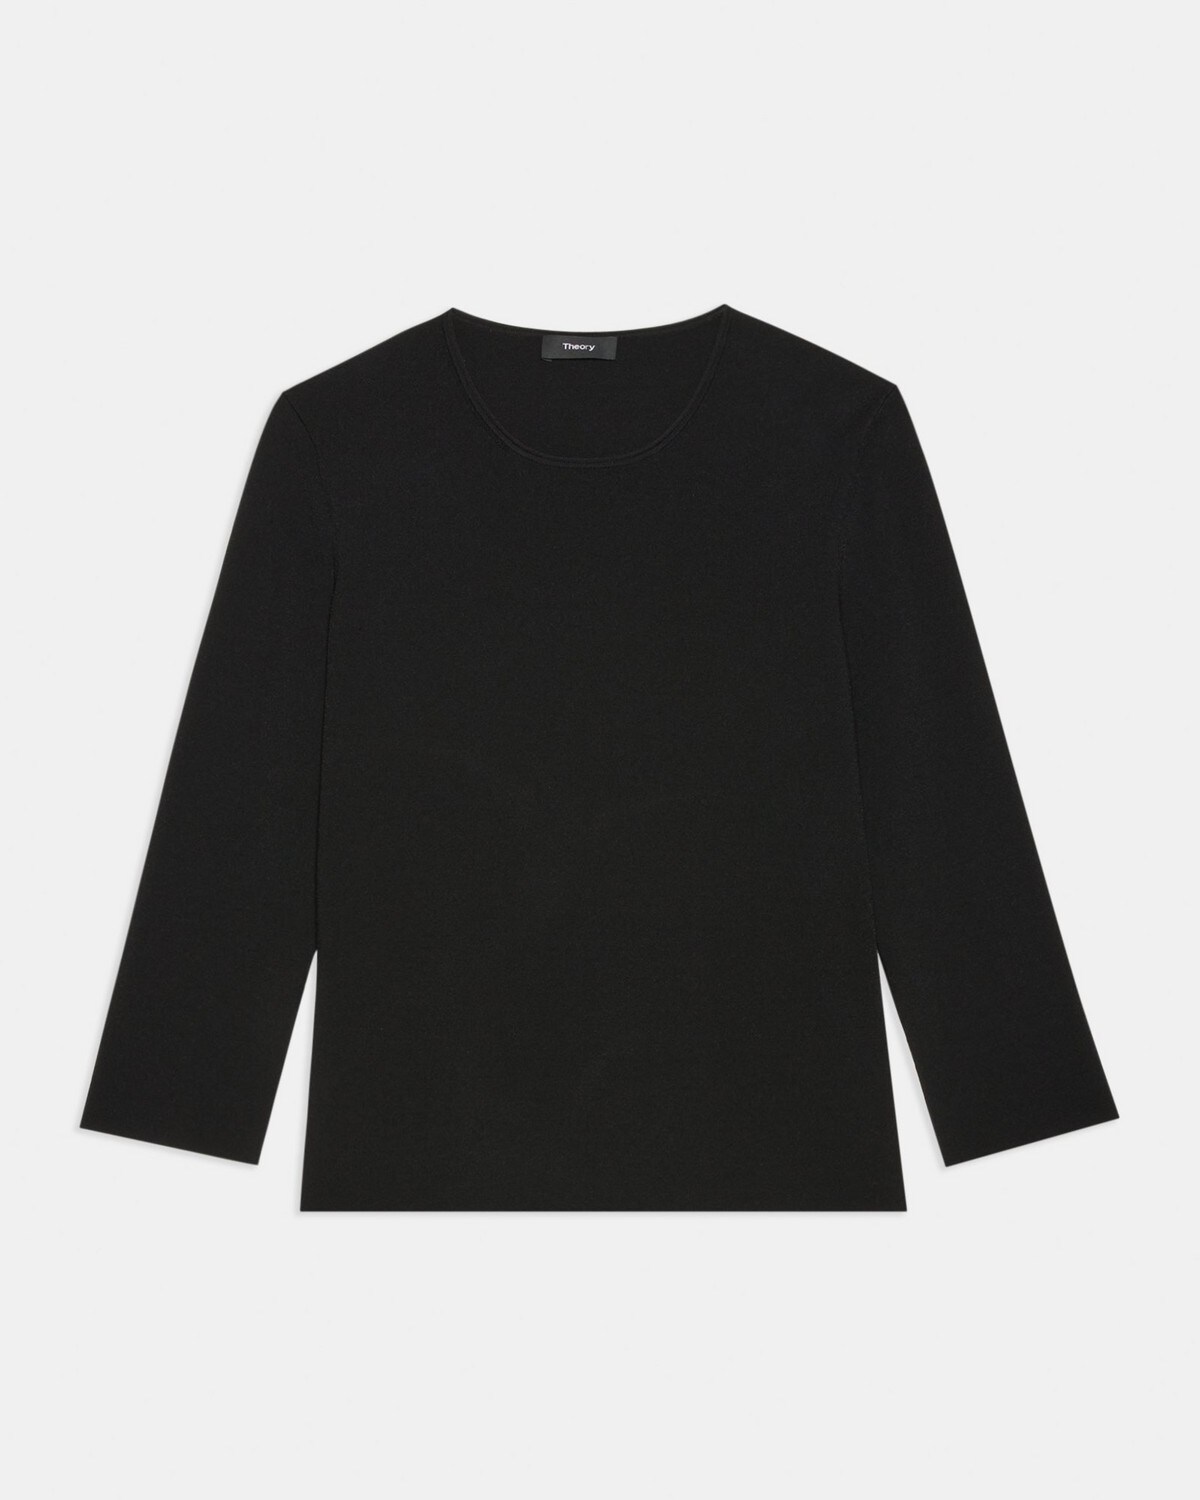 Clean Crewneck Sweater in Crepe Knit